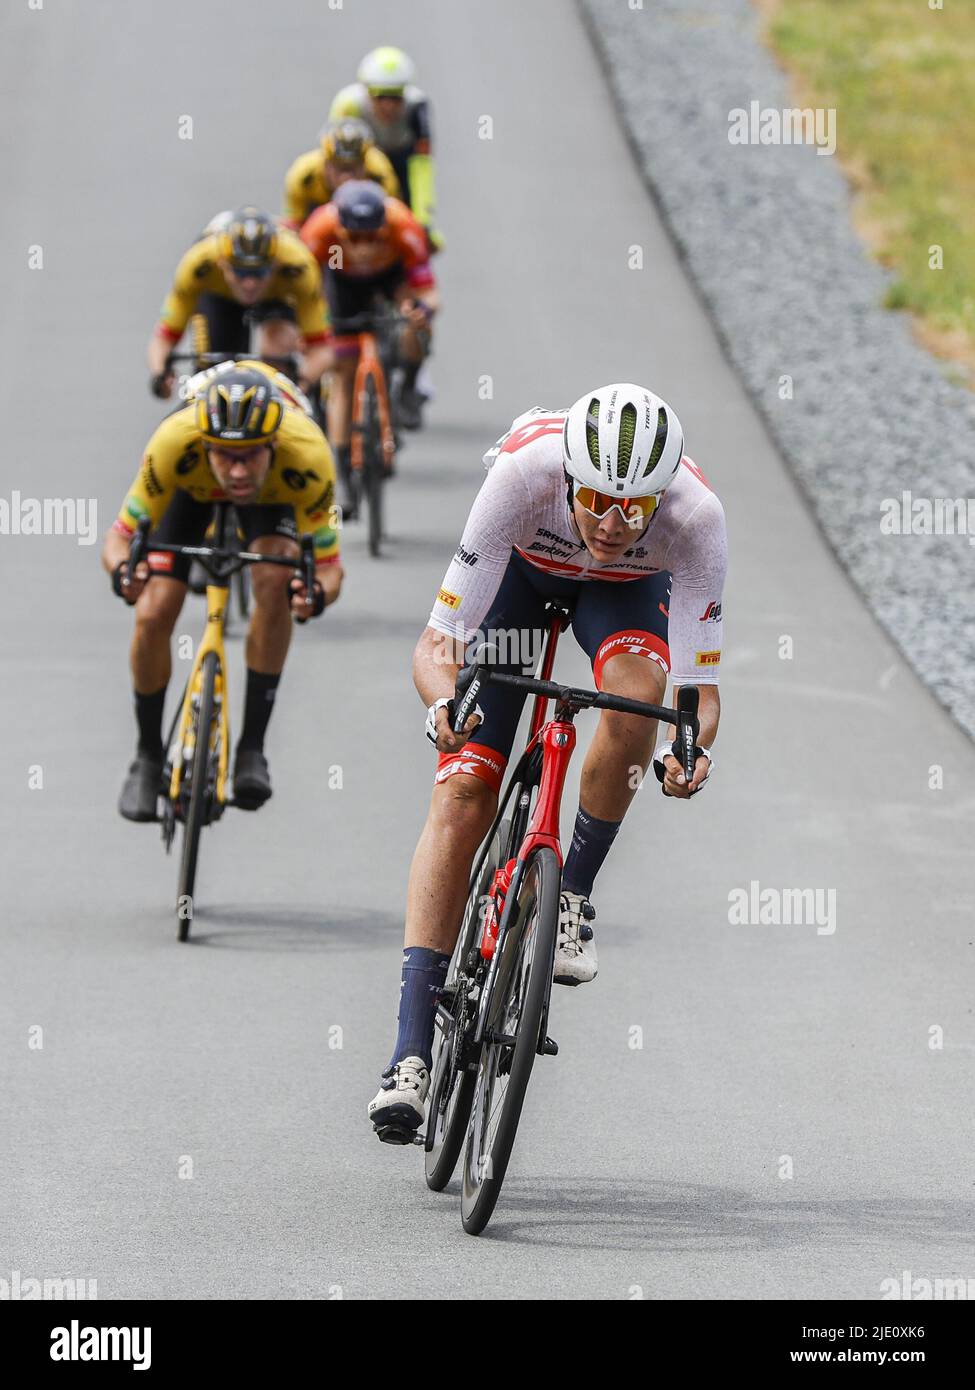 Drenthe, Netherlands. 24th June 2022. EMMEN - Cyclist Daan Hoole in action during the National Championships Cycling in Drenthe. ANP BAS CZERWINSKIA Credit: ANP/Alamy Live News Stock Photo